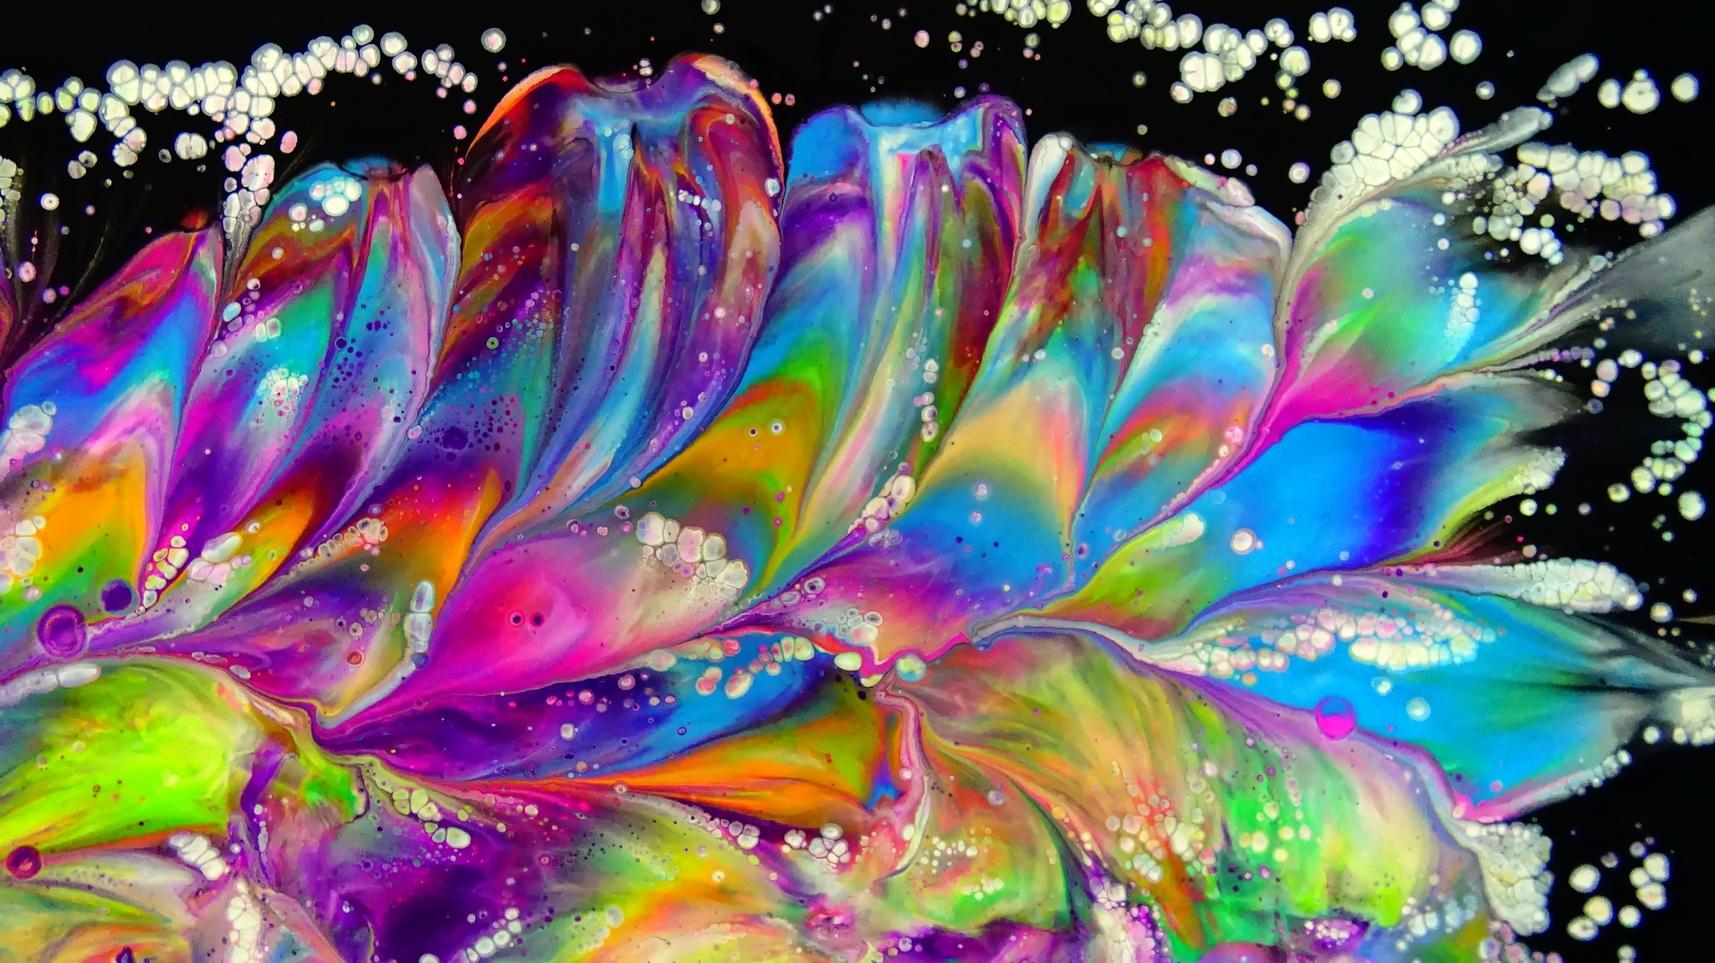 Metallic or Pearlescent paint experience? - WetCanvas: Online Living for  Artists